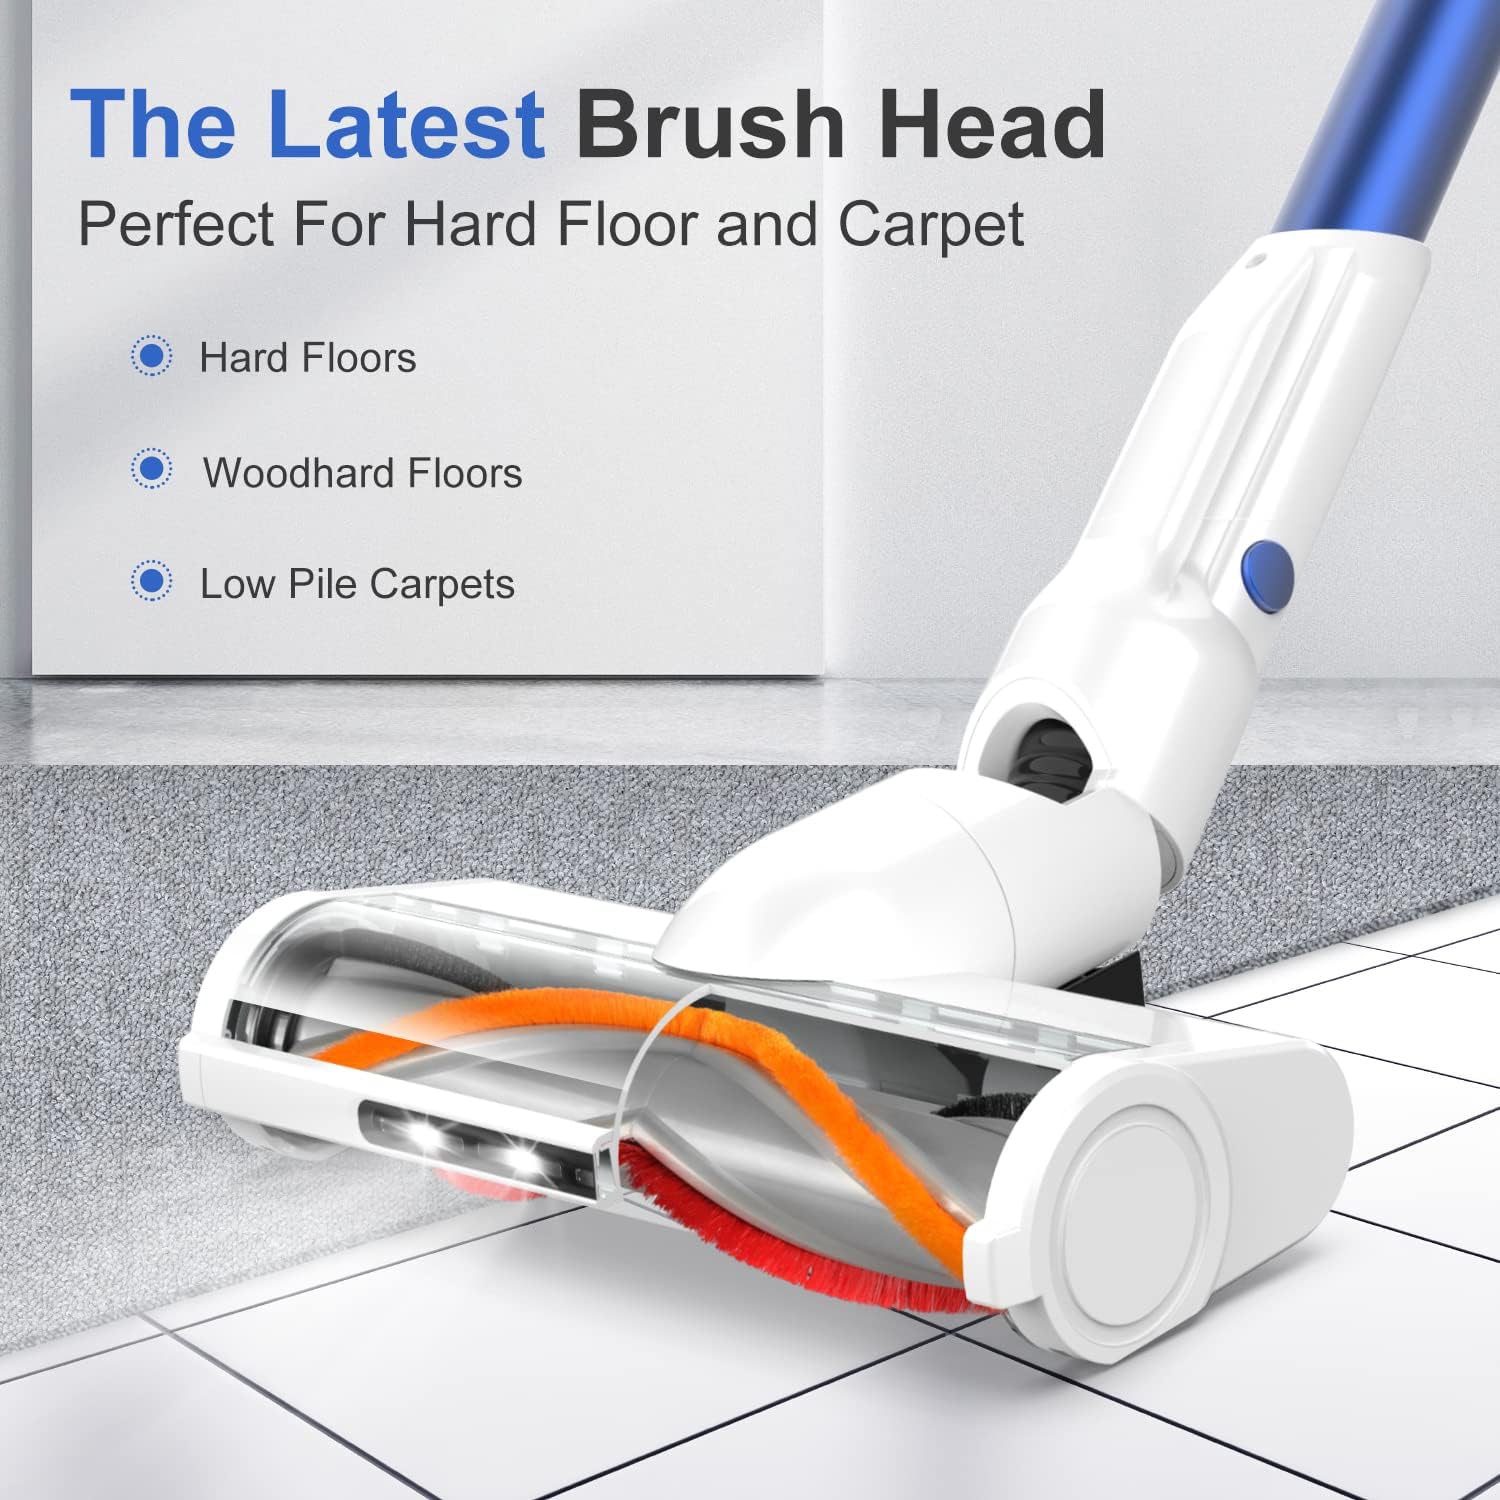 wurese Cordless Vacuum Cleaner, Upgraded 25Kpa Suction 280W Brushless Motor Cordless Stick Vacuum Cleaner, Lightweight Handheld Vacuum for Home Pet Hair Carpet Hard Floor, up to 55mins Runtime